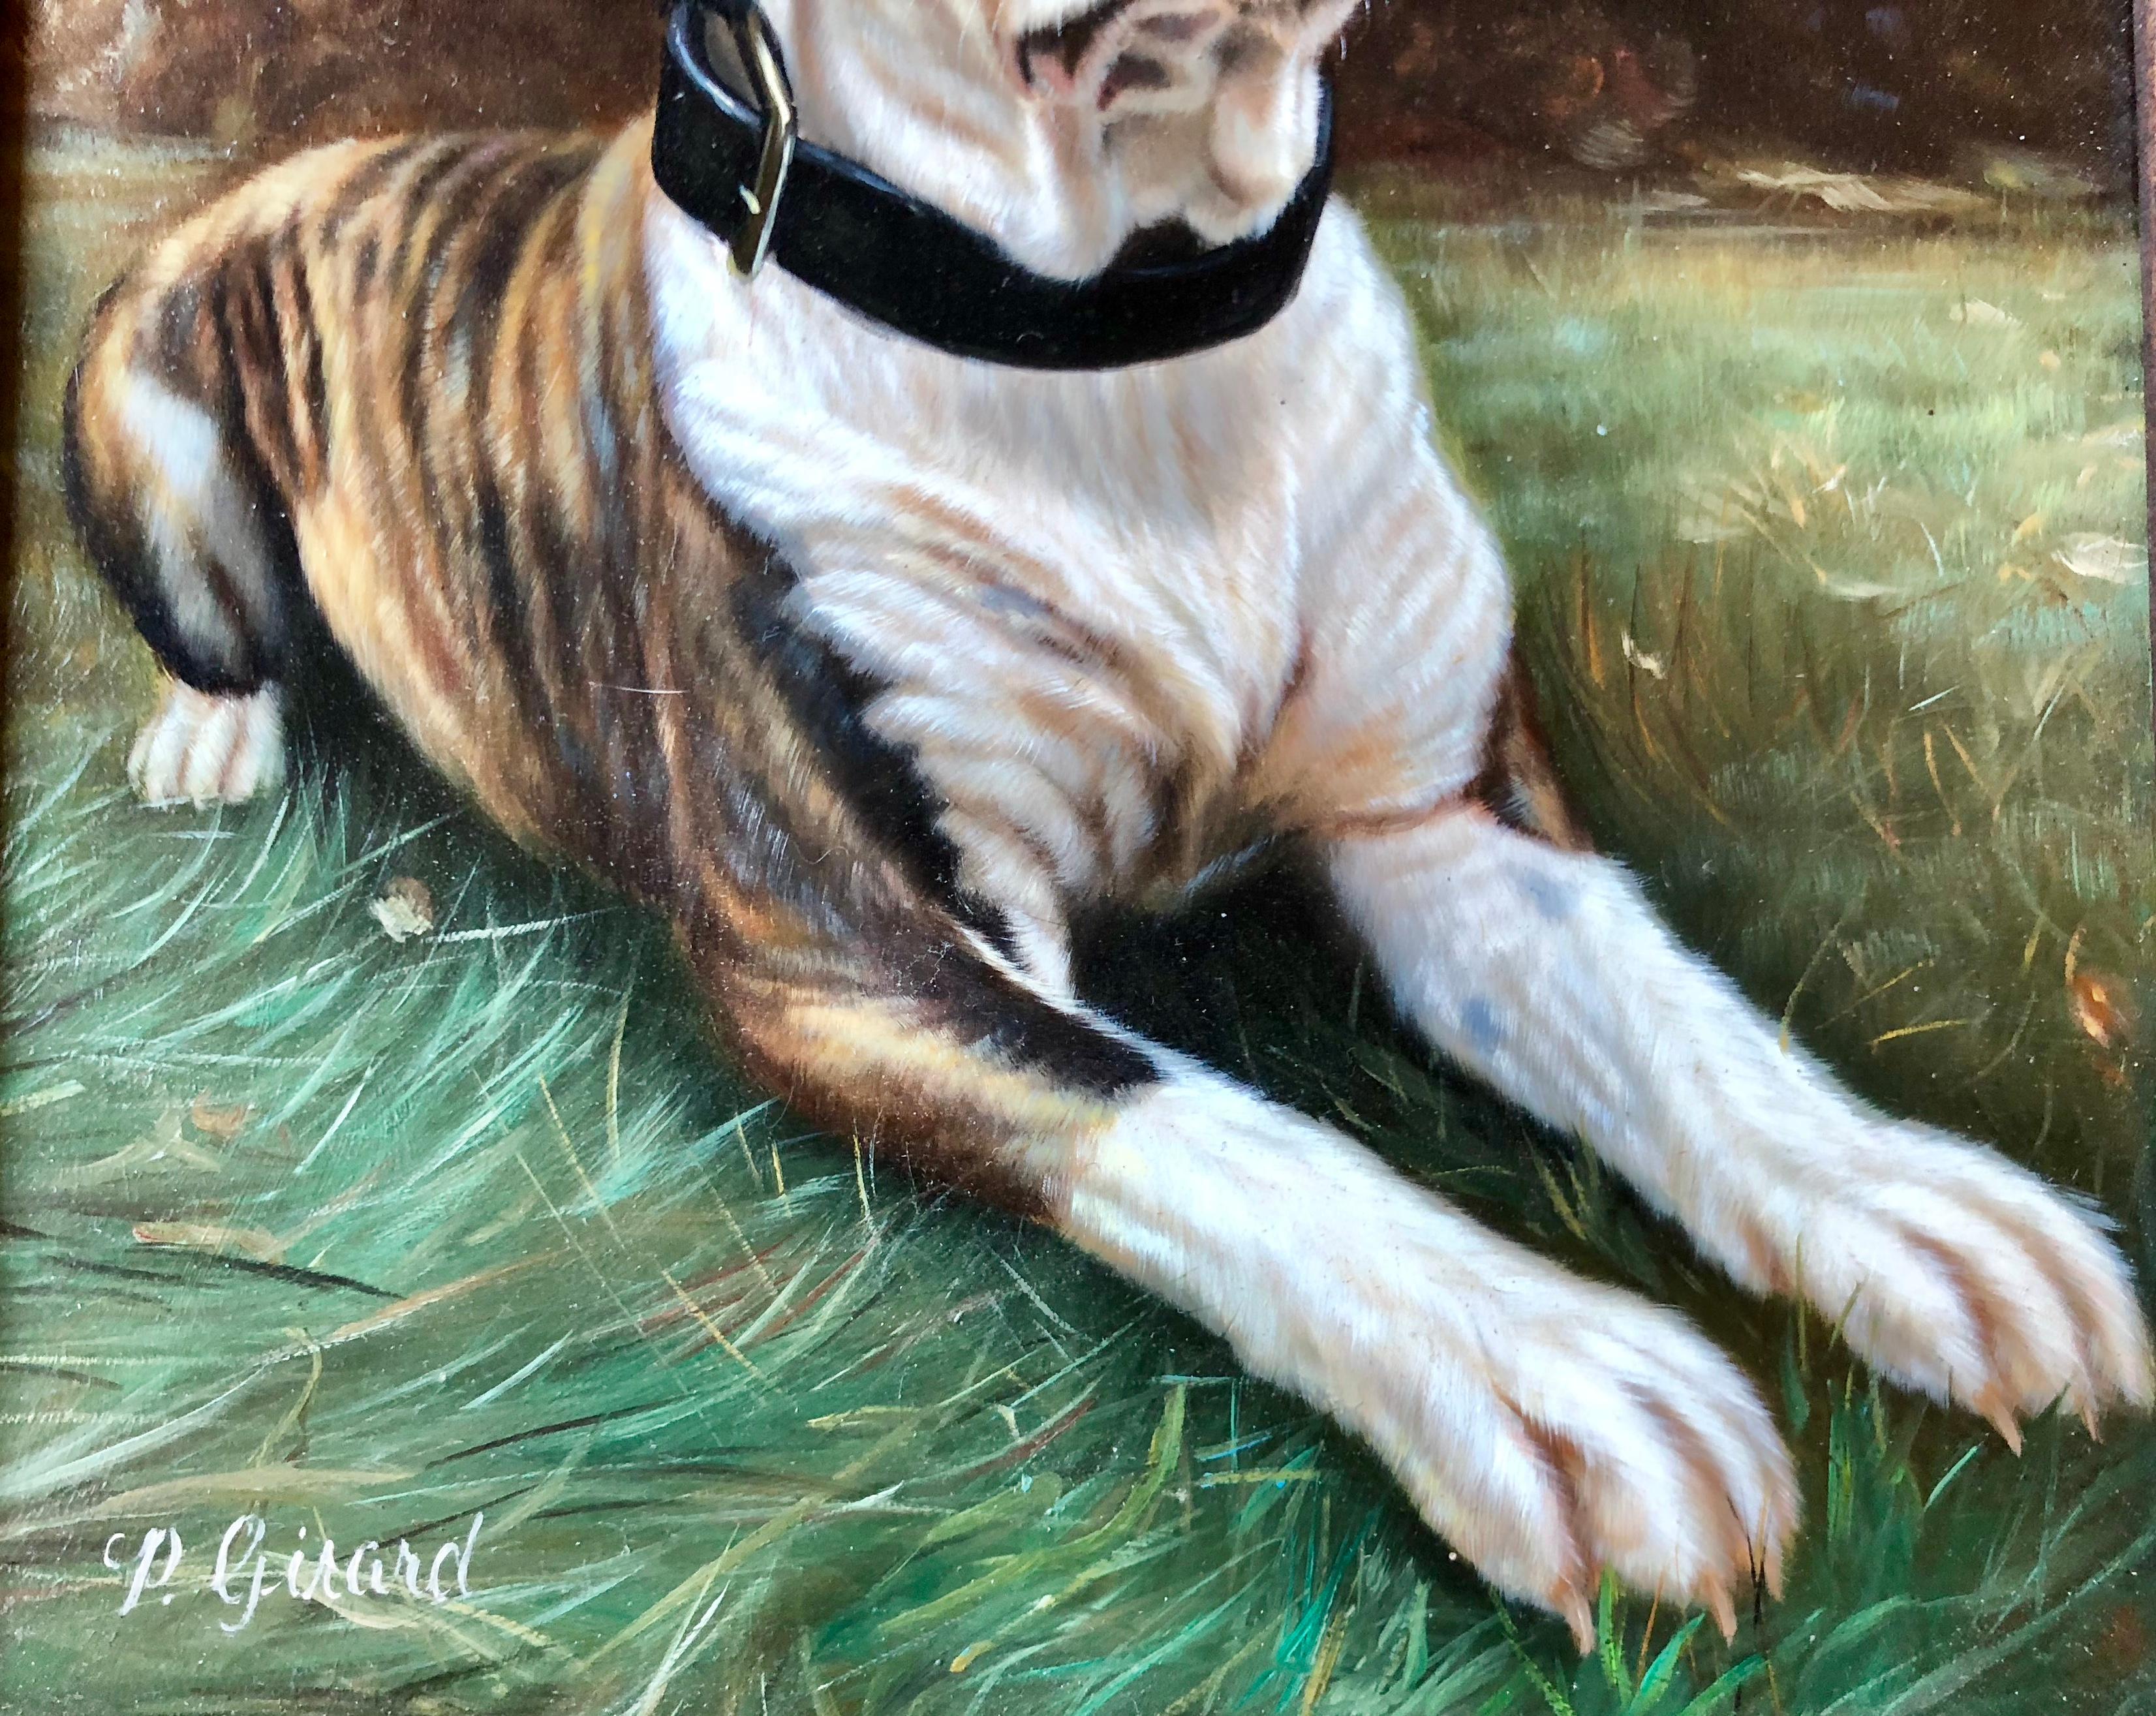 Fine Quality Original Oil Painting American Bulldog by French Artist Girard In Good Condition For Sale In Tustin, CA